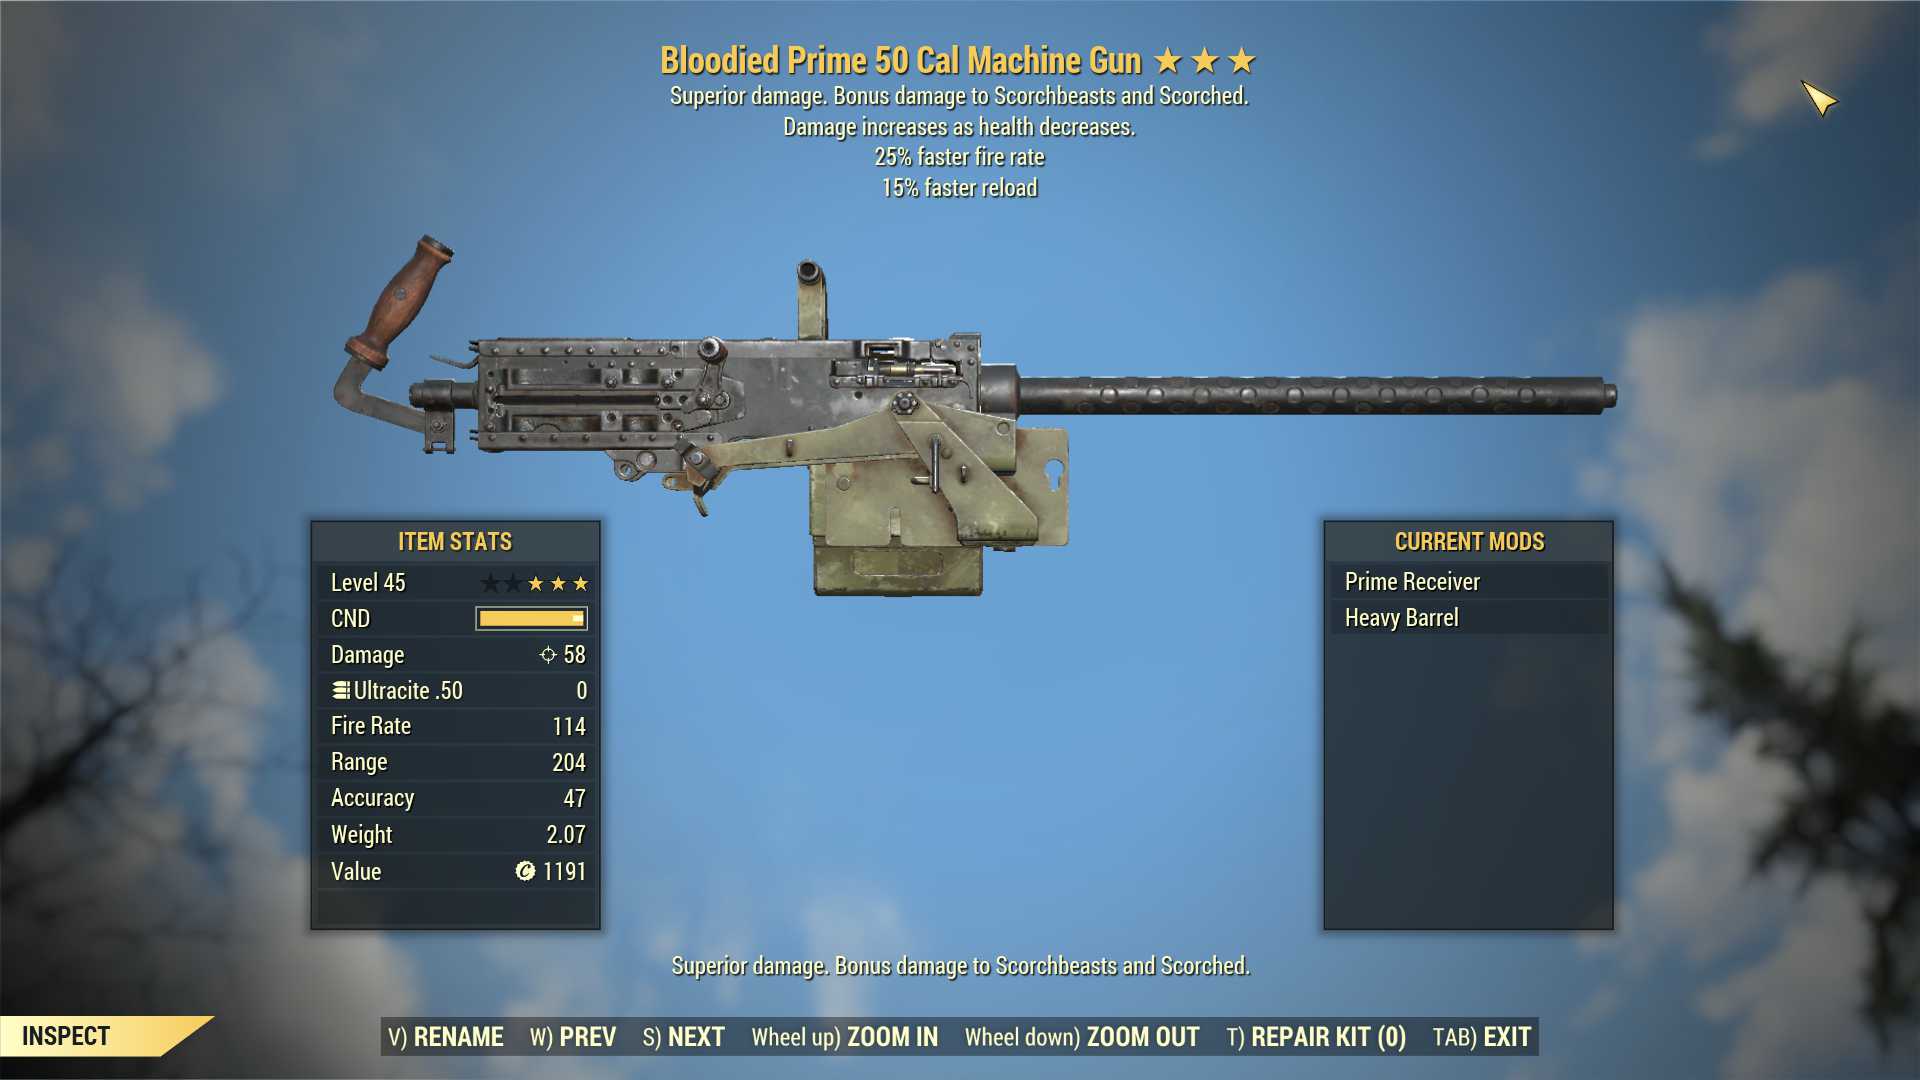 Bloodied 50 Cal Machine Gun (25% faster fire rate, 15% faster reload)